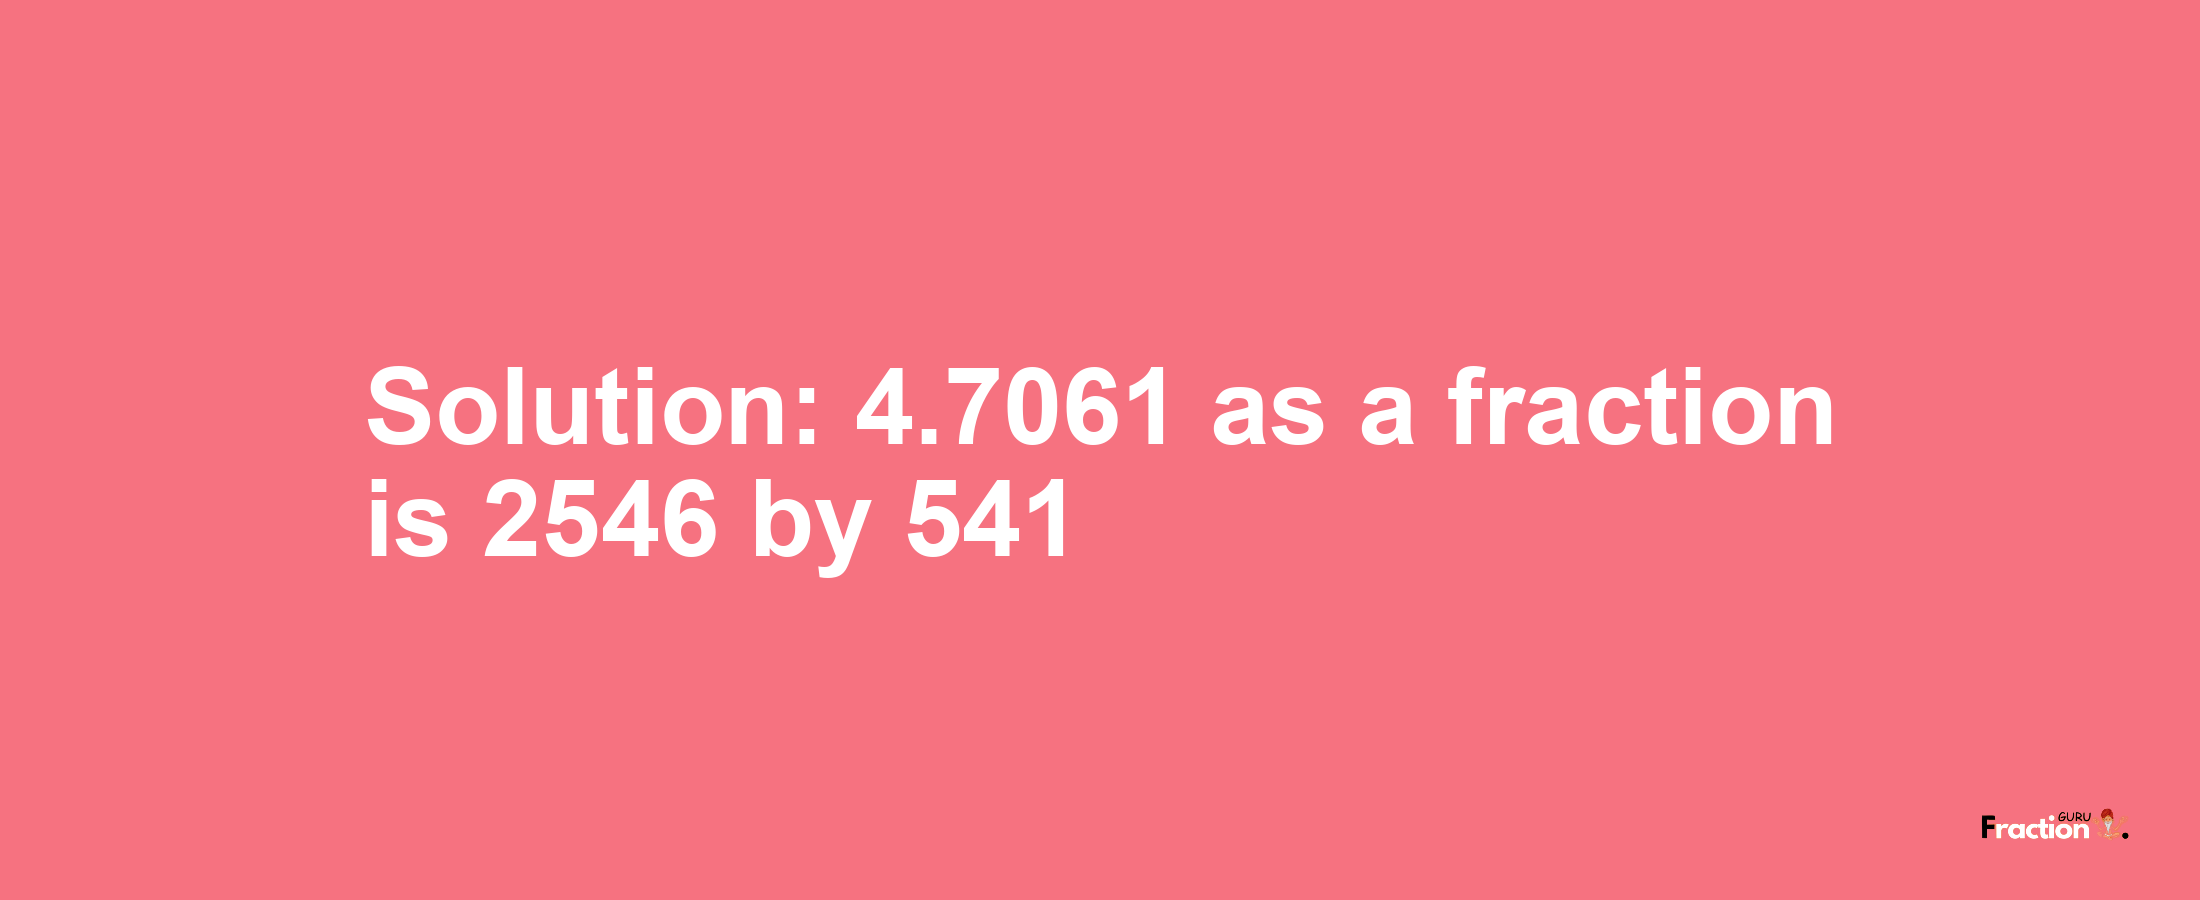 Solution:4.7061 as a fraction is 2546/541